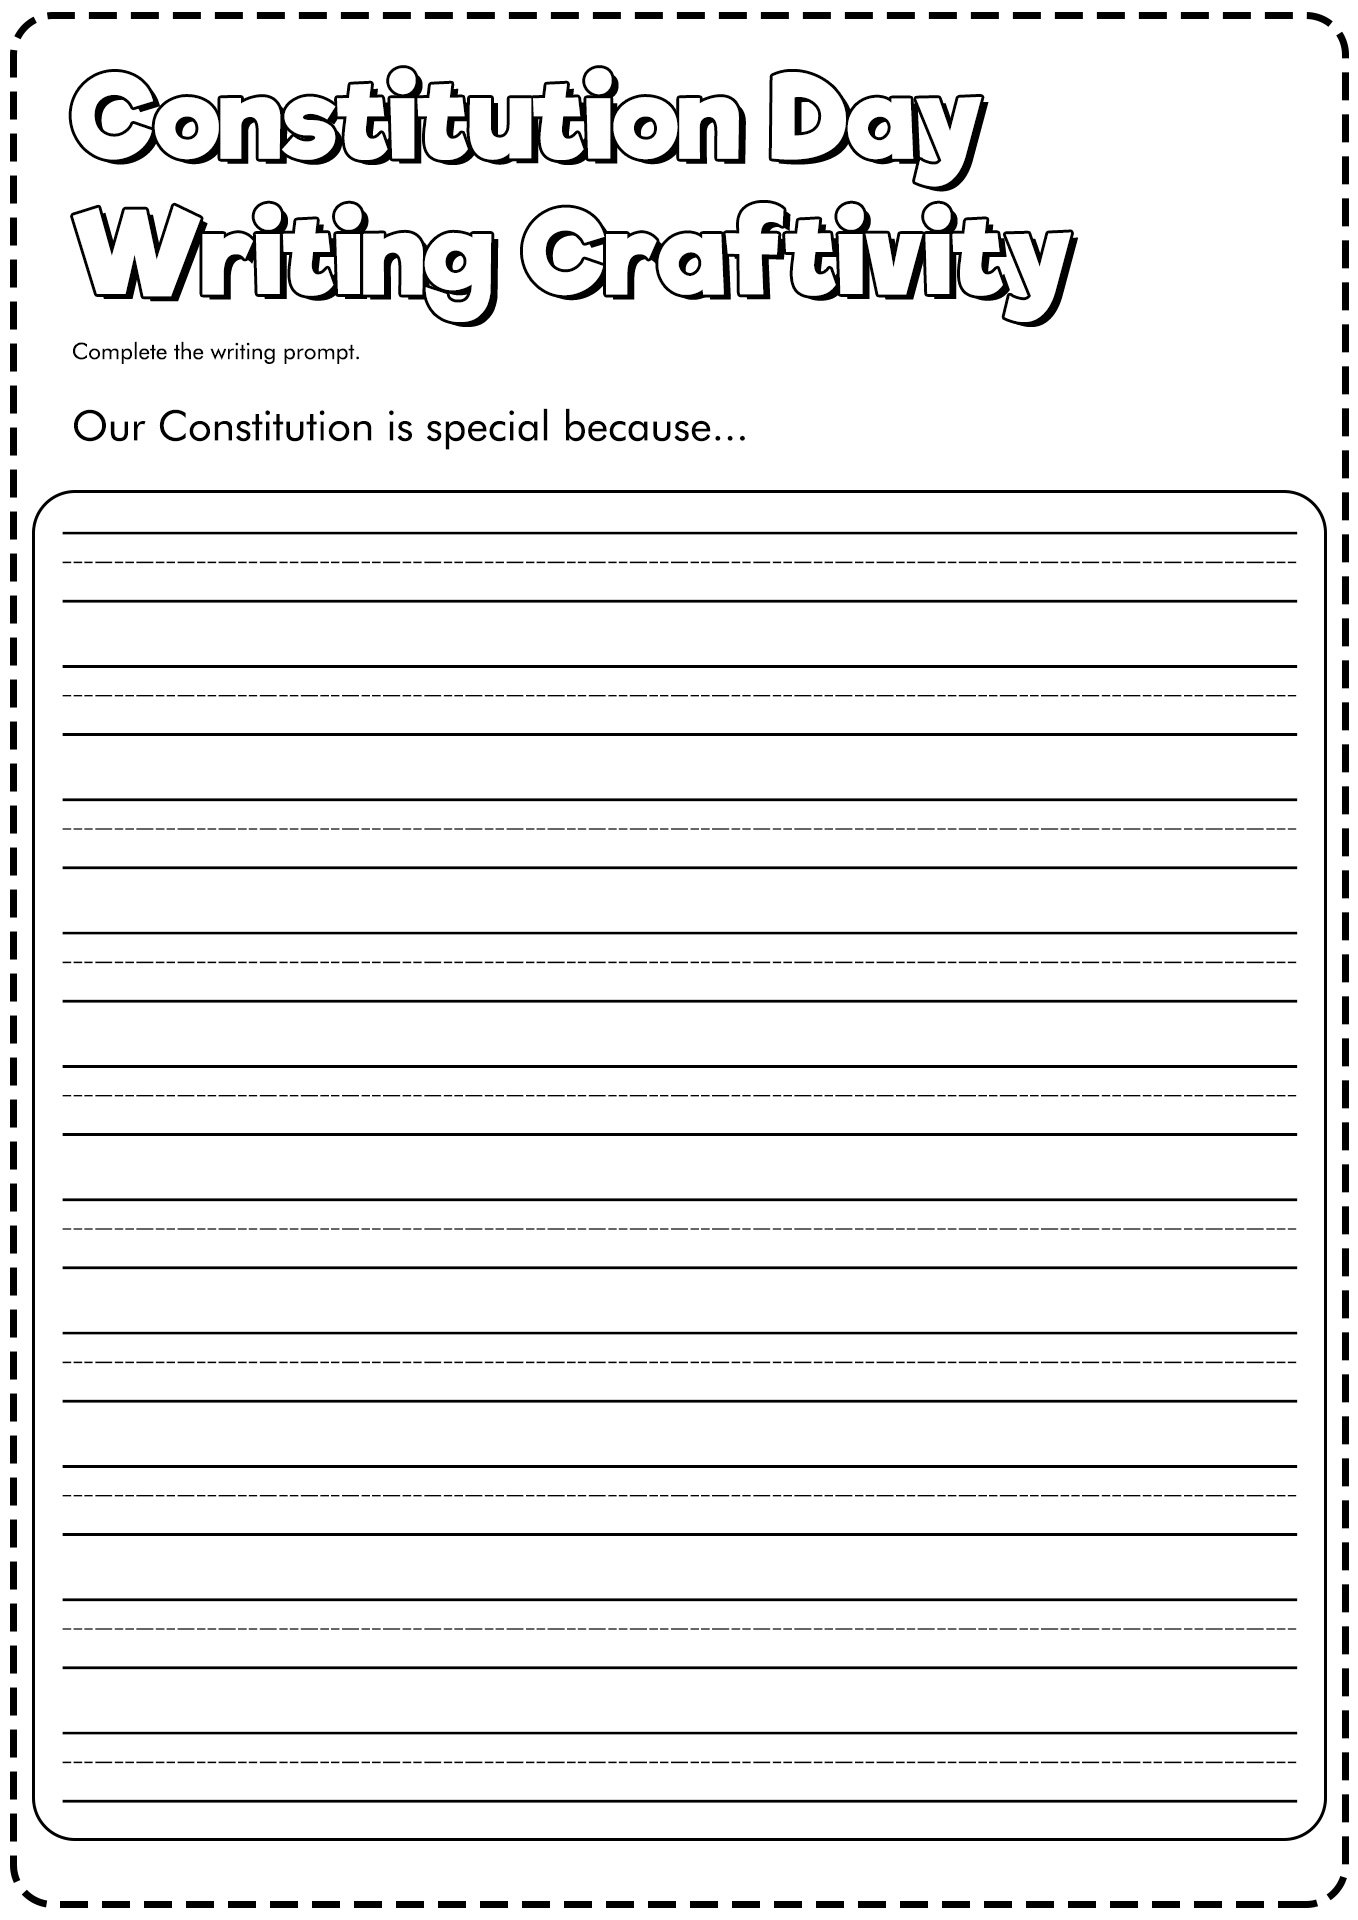 11-best-images-of-constitution-activity-worksheets-constitution-day